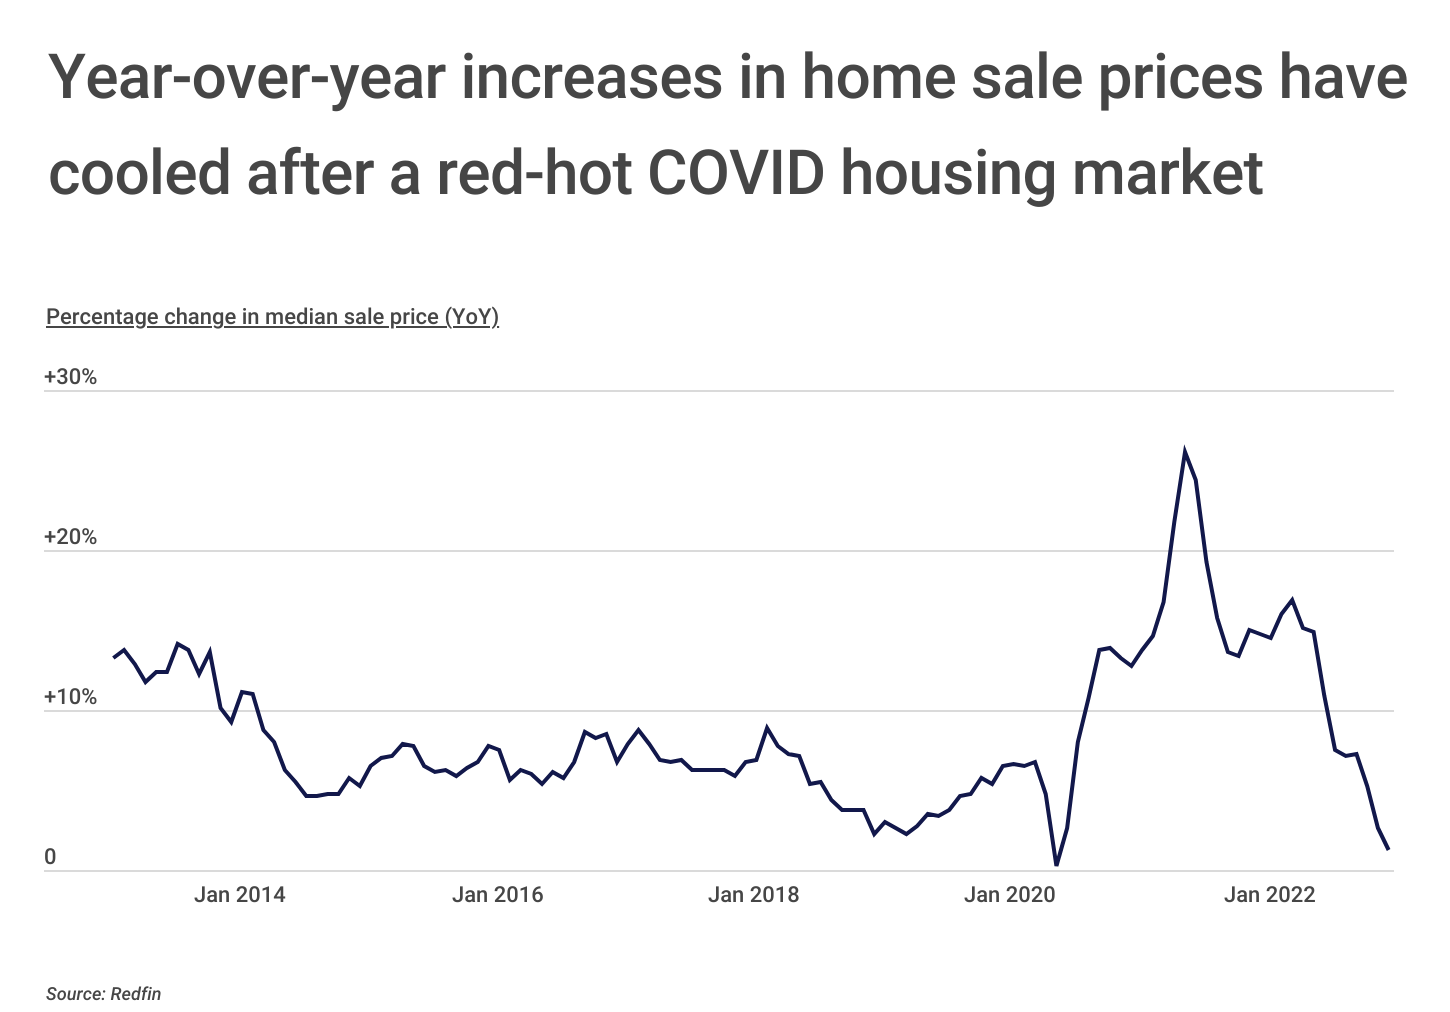 Chart1_YoY increases in home sale prices have cooled after COVID